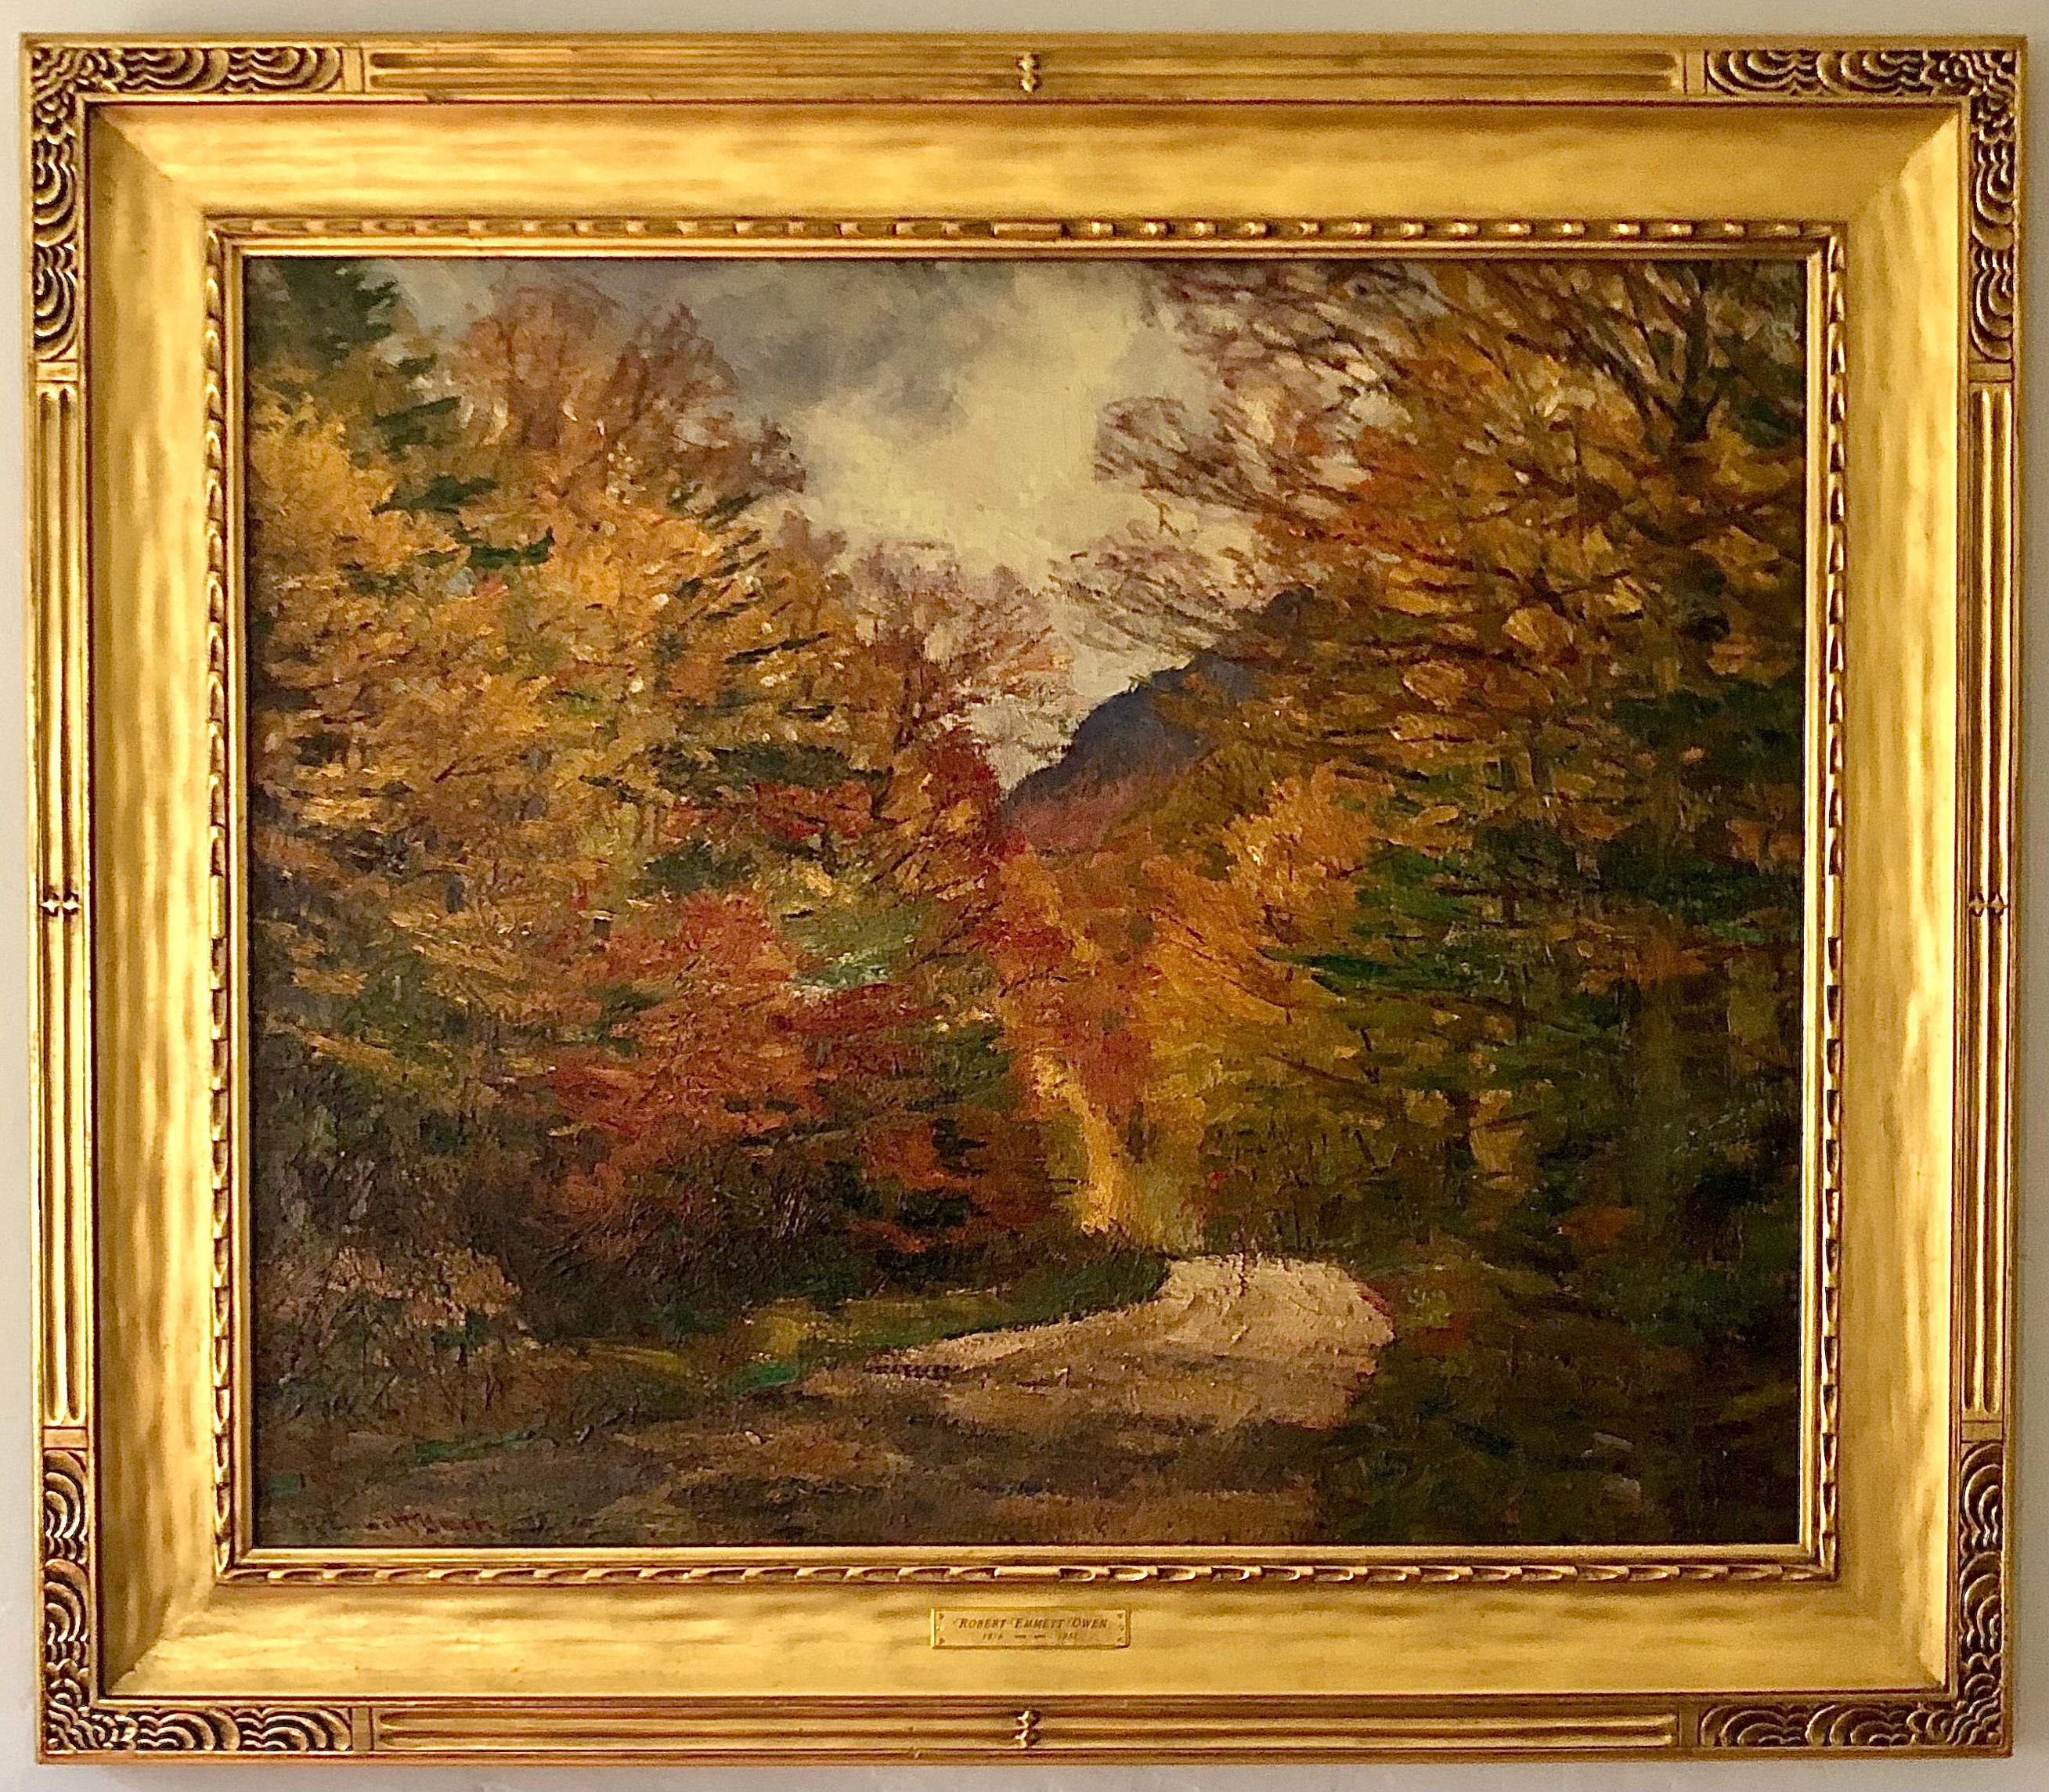 Oil on canvas, signed lower right. Measures 39.5